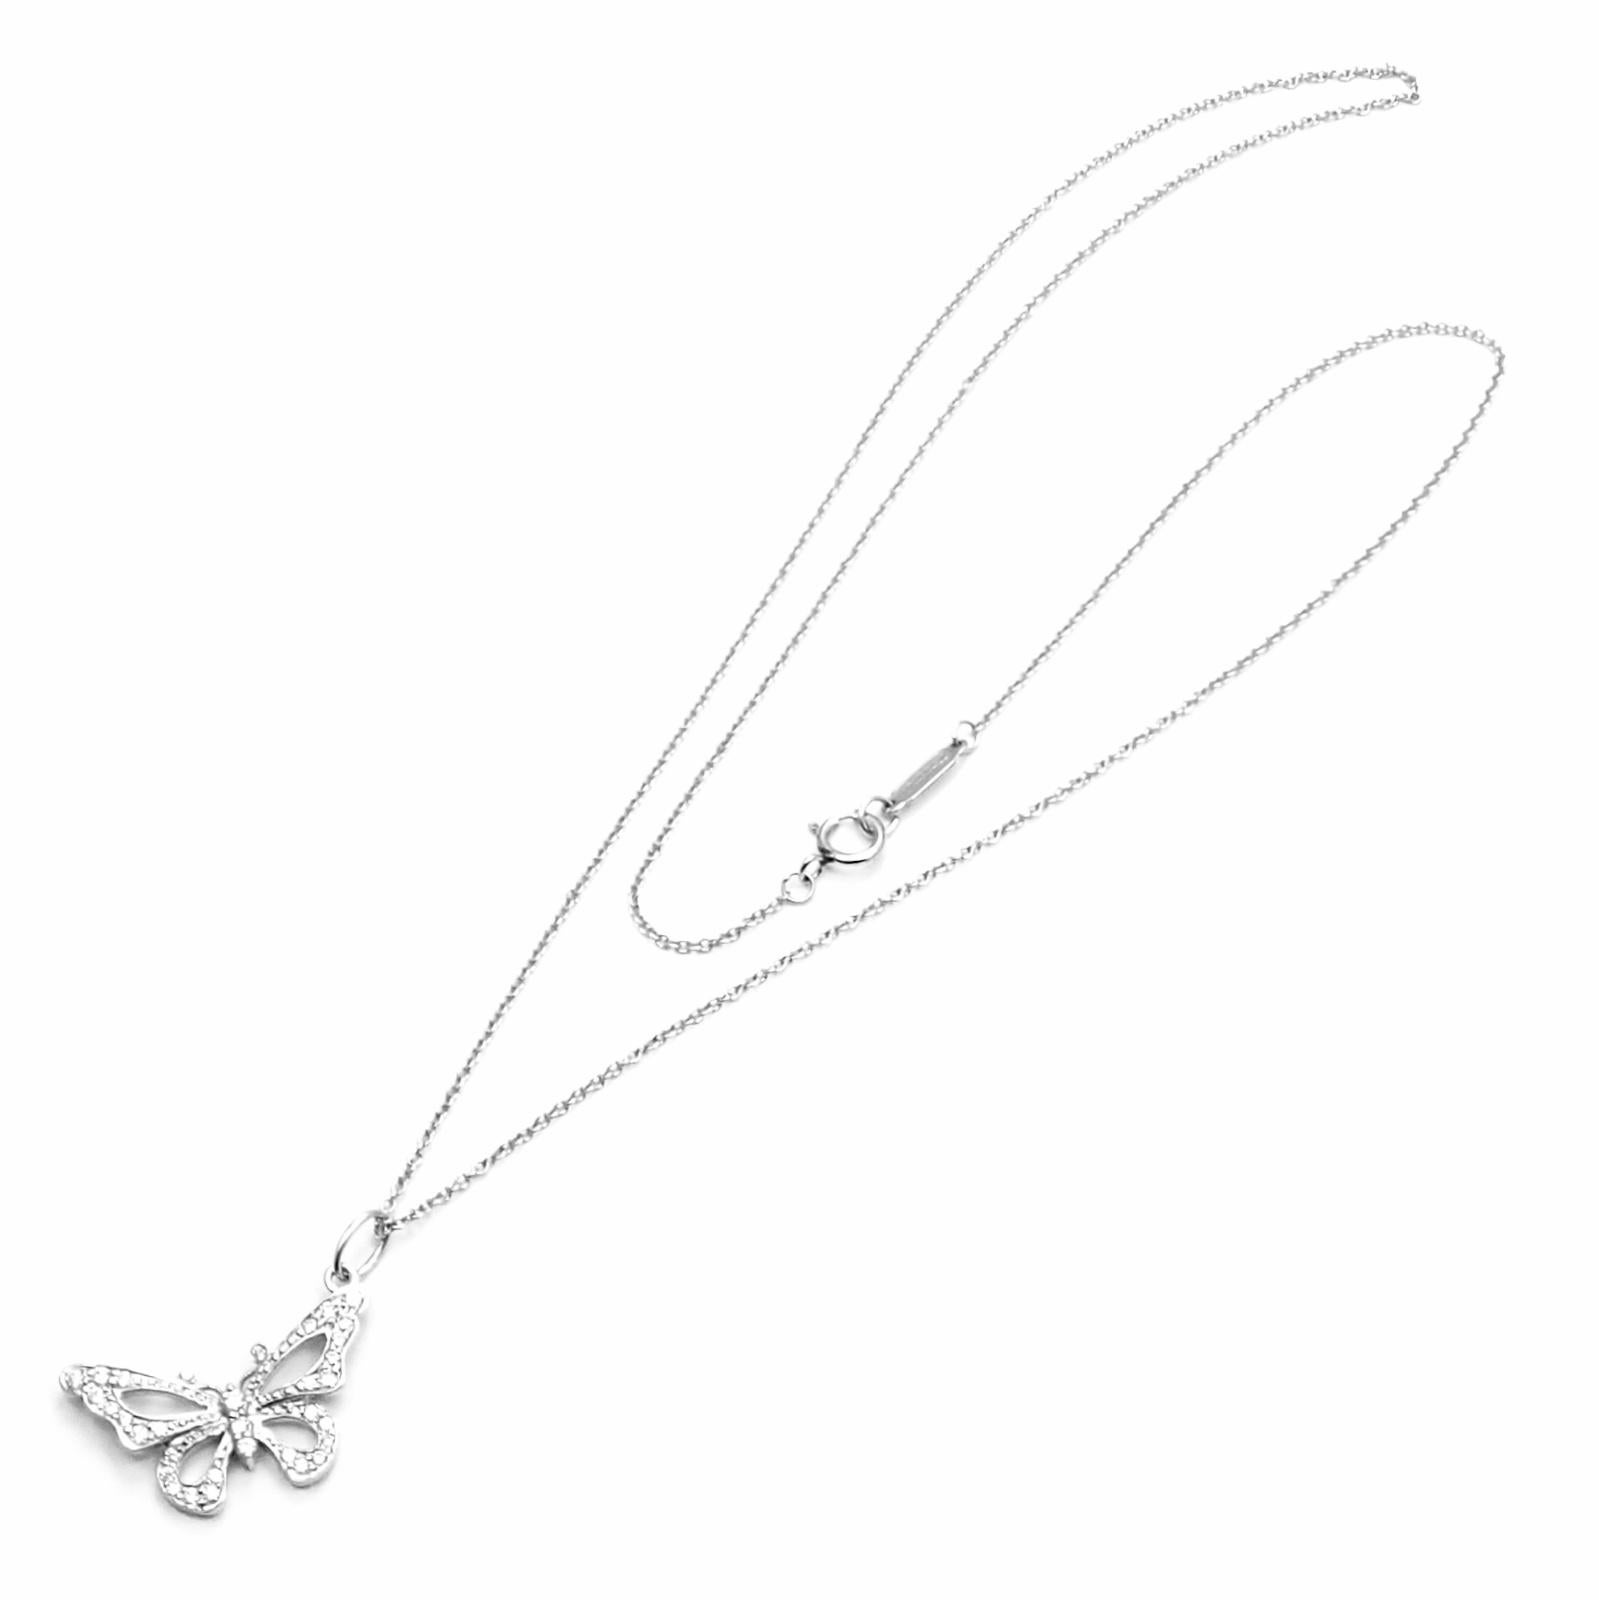 Platinum Diamond Butterfly Pendant Necklace by Tiffany & Co.
With Round brilliant cut diamonds VS1 clarity, G color total weight approx. 0.70ct
Details:
Chain Length: 18